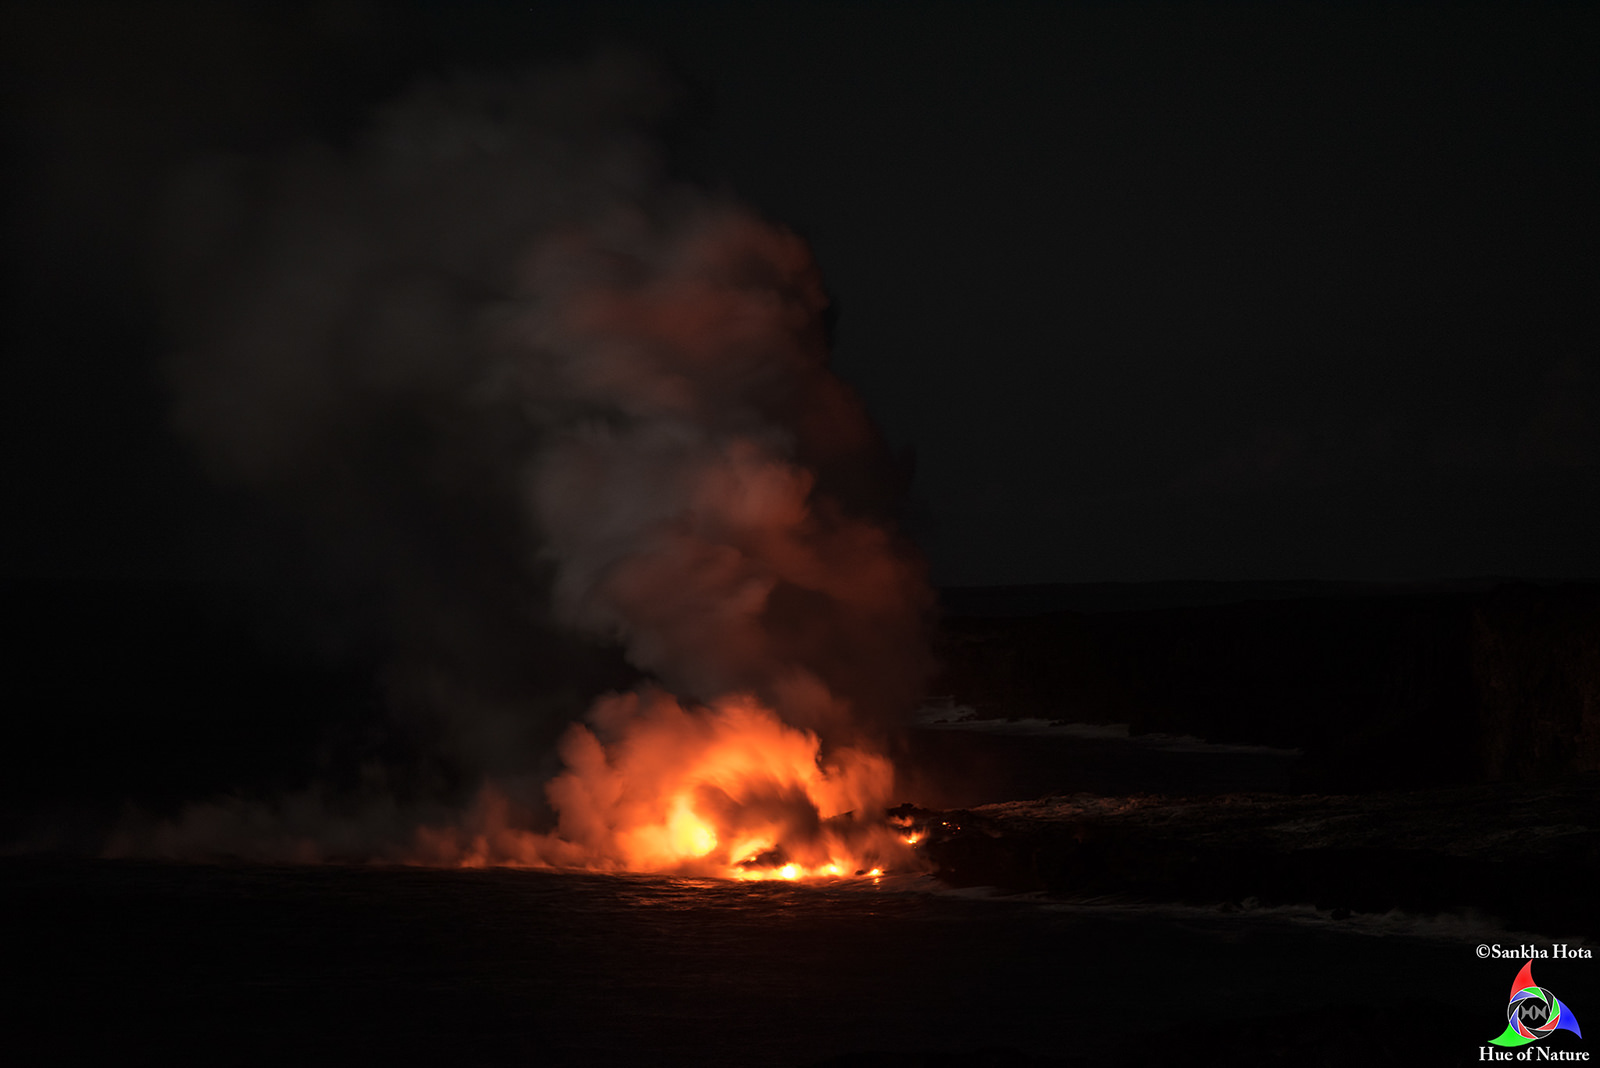 The final phase when lava meets the ocean water